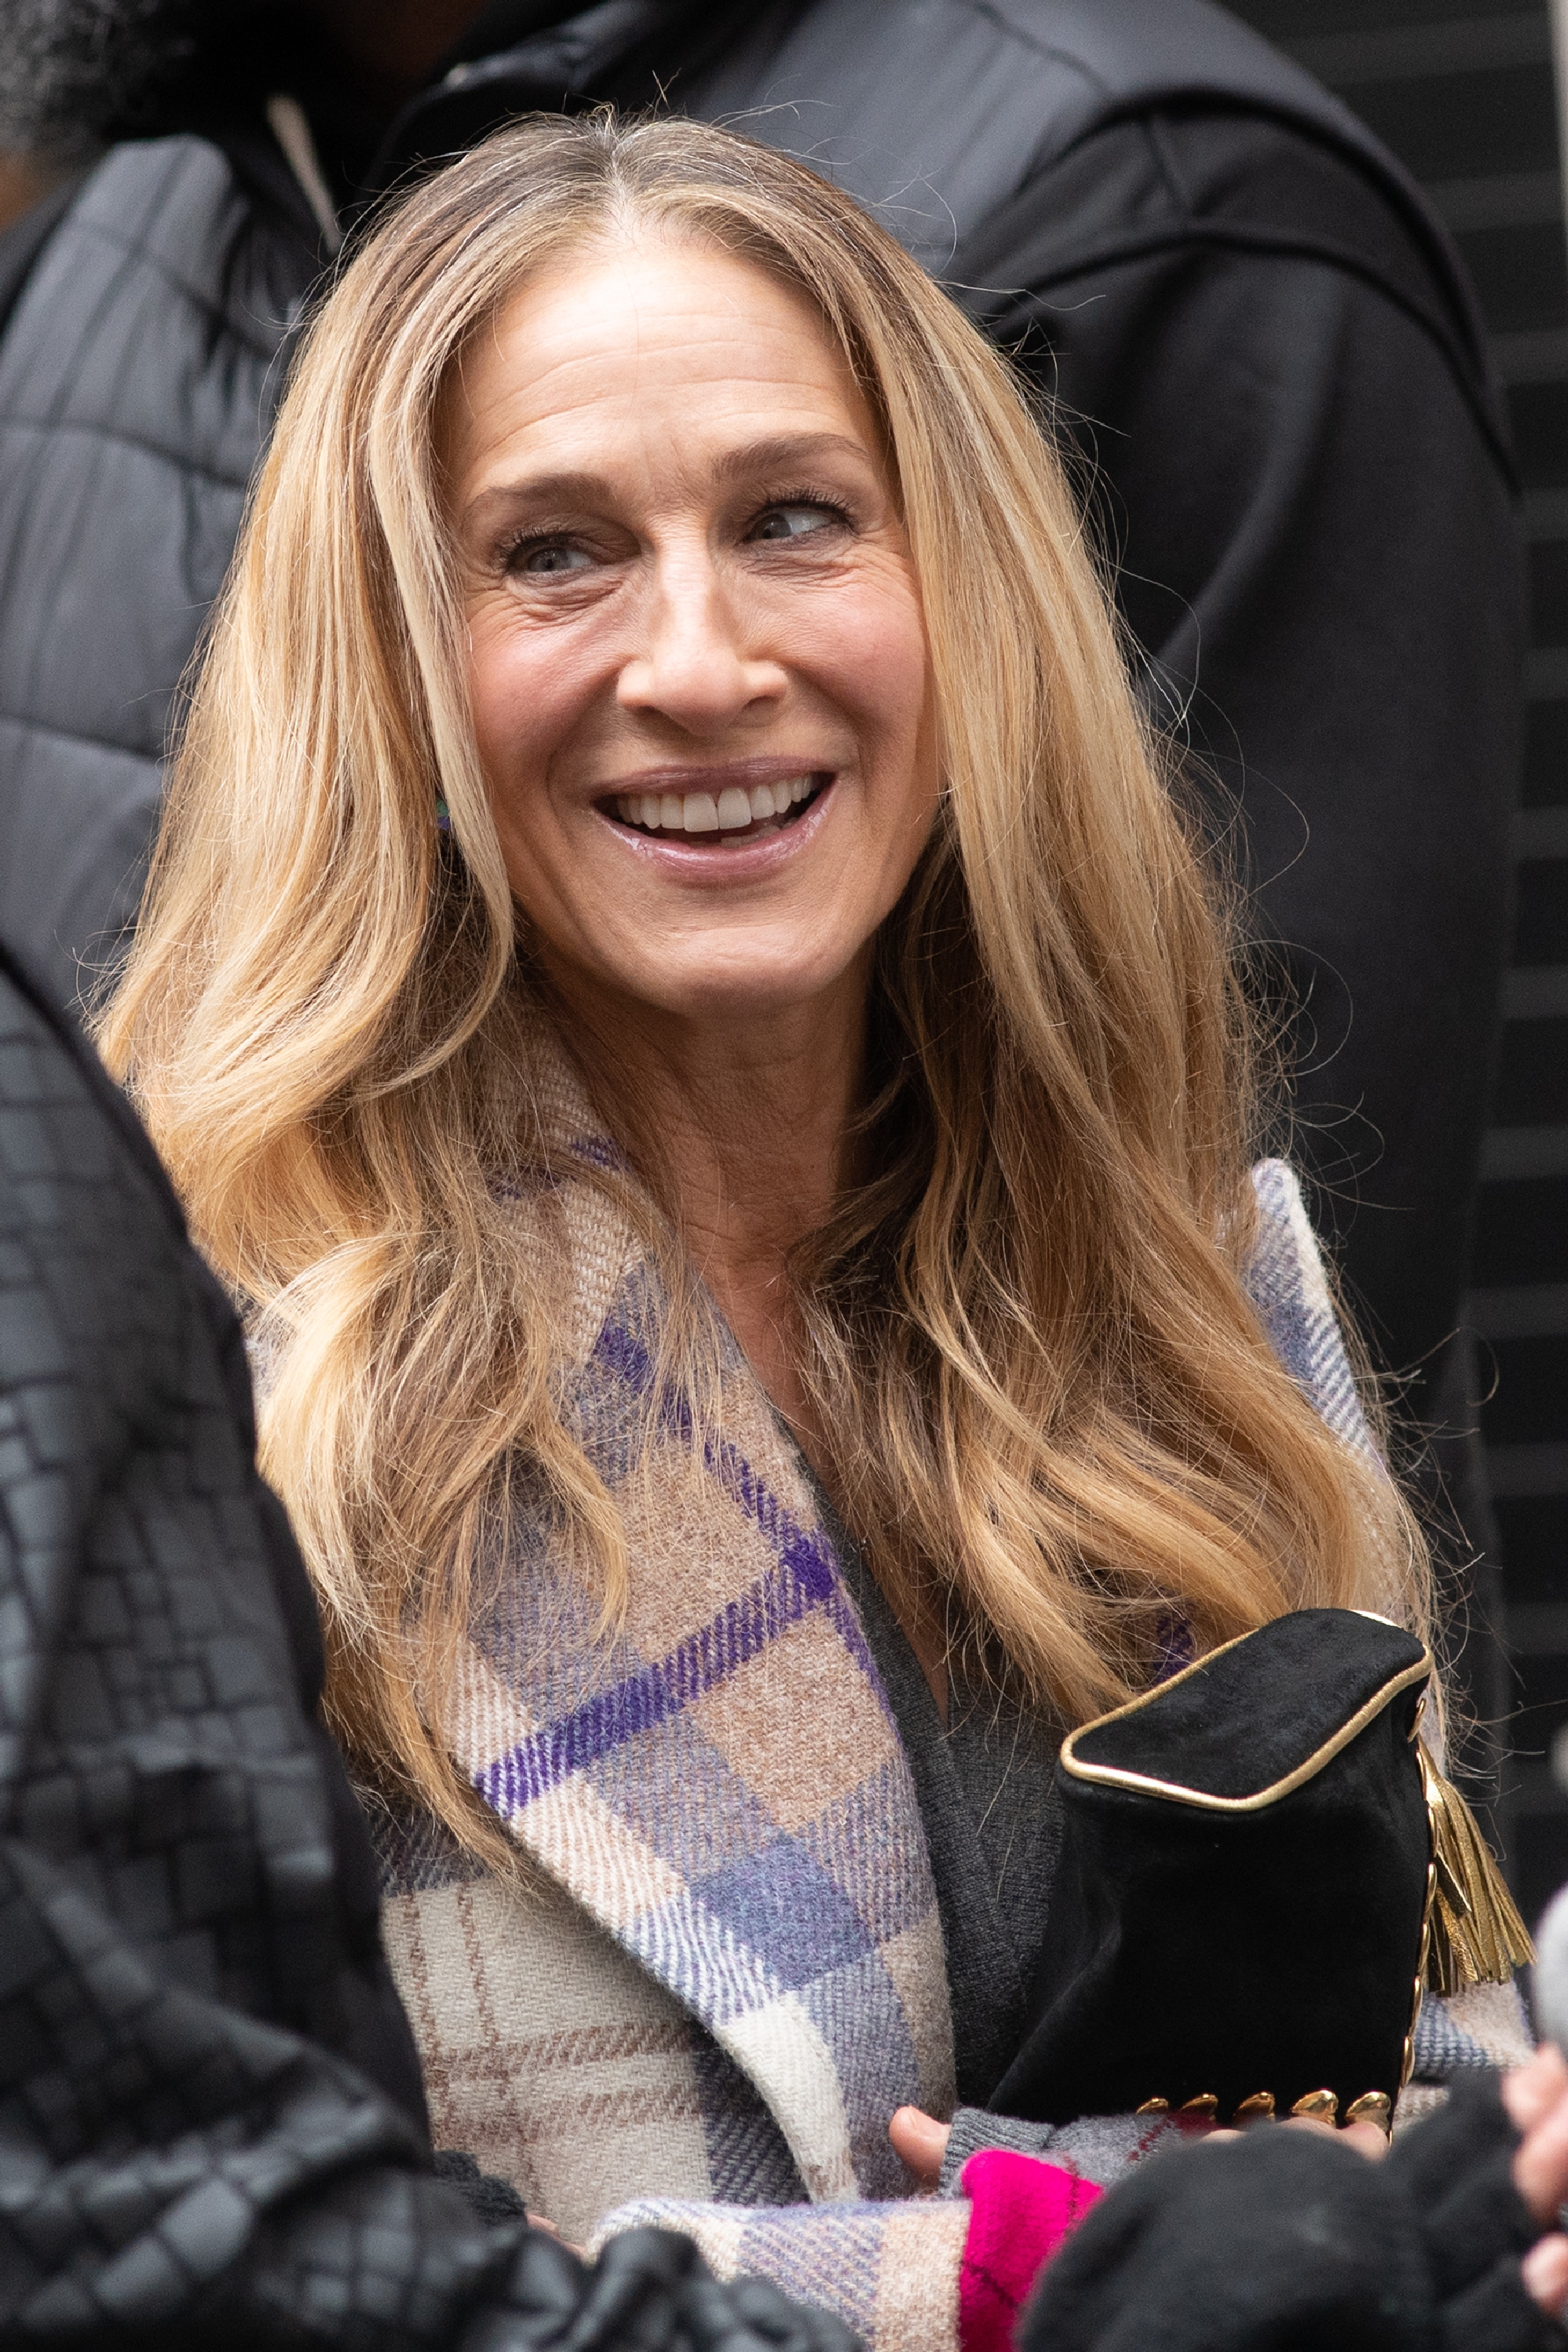 Sarah Jessica Parker am Set von "And Just Like That" am 2. März 2023 in New York, New York. | Quelle: Getty Images